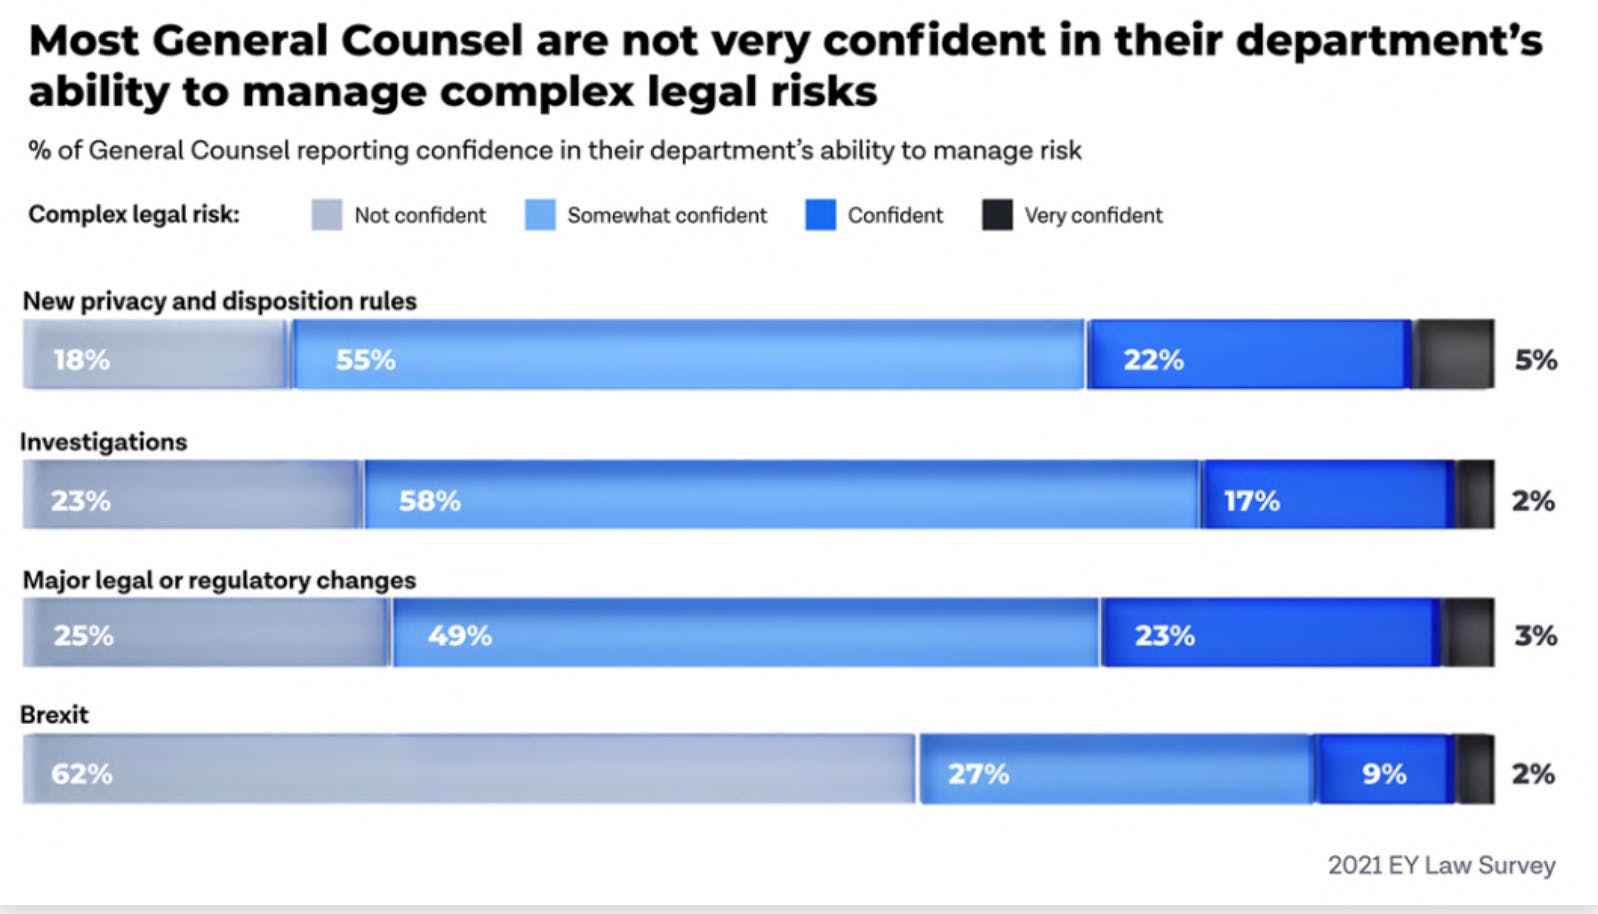 Most general counsels lack confidence in managing complex legal risks